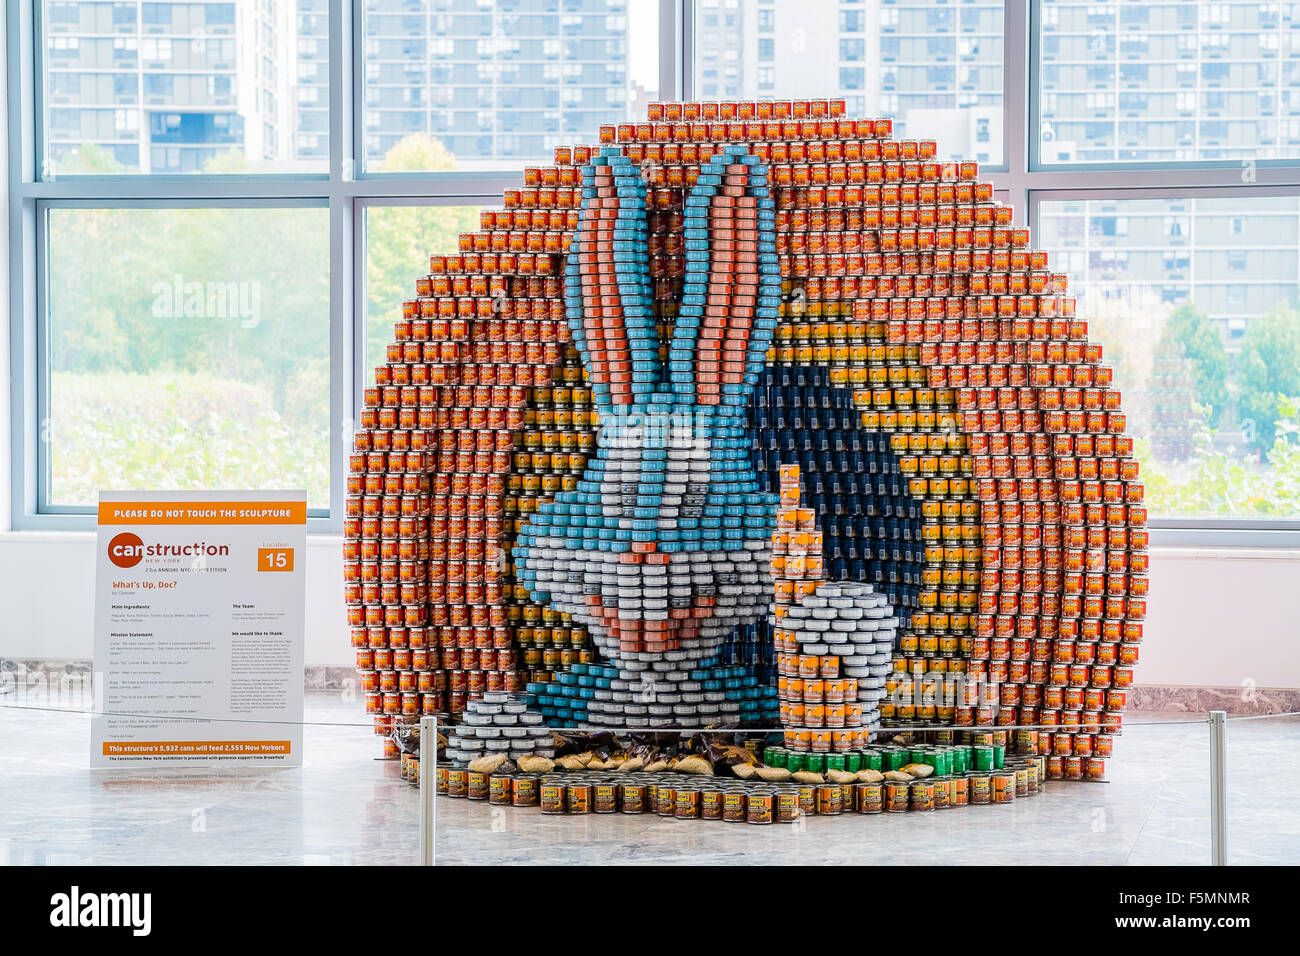 (151106) -- NEW YORK, Nov. 6, 2015 (Xinhua) -- Cartoon character 'Bugs Bunny' made out of food cans is displayed at the 22nd 'Canstruction' exhibition in New York, Nov. 6, 2015. Works by winners of the 22nd Annual 'Canstruction' International Design Competition are displayed in the Brookfield Place in downtown Manhattan. The exhibition features sculptures made entirely of unopened canned food. More than 1,200 local winners from 125 cities around the world participated in the competition. The canned food used in the exhibition will be donated to a local food bank responsible for feeding more th Stock Photo